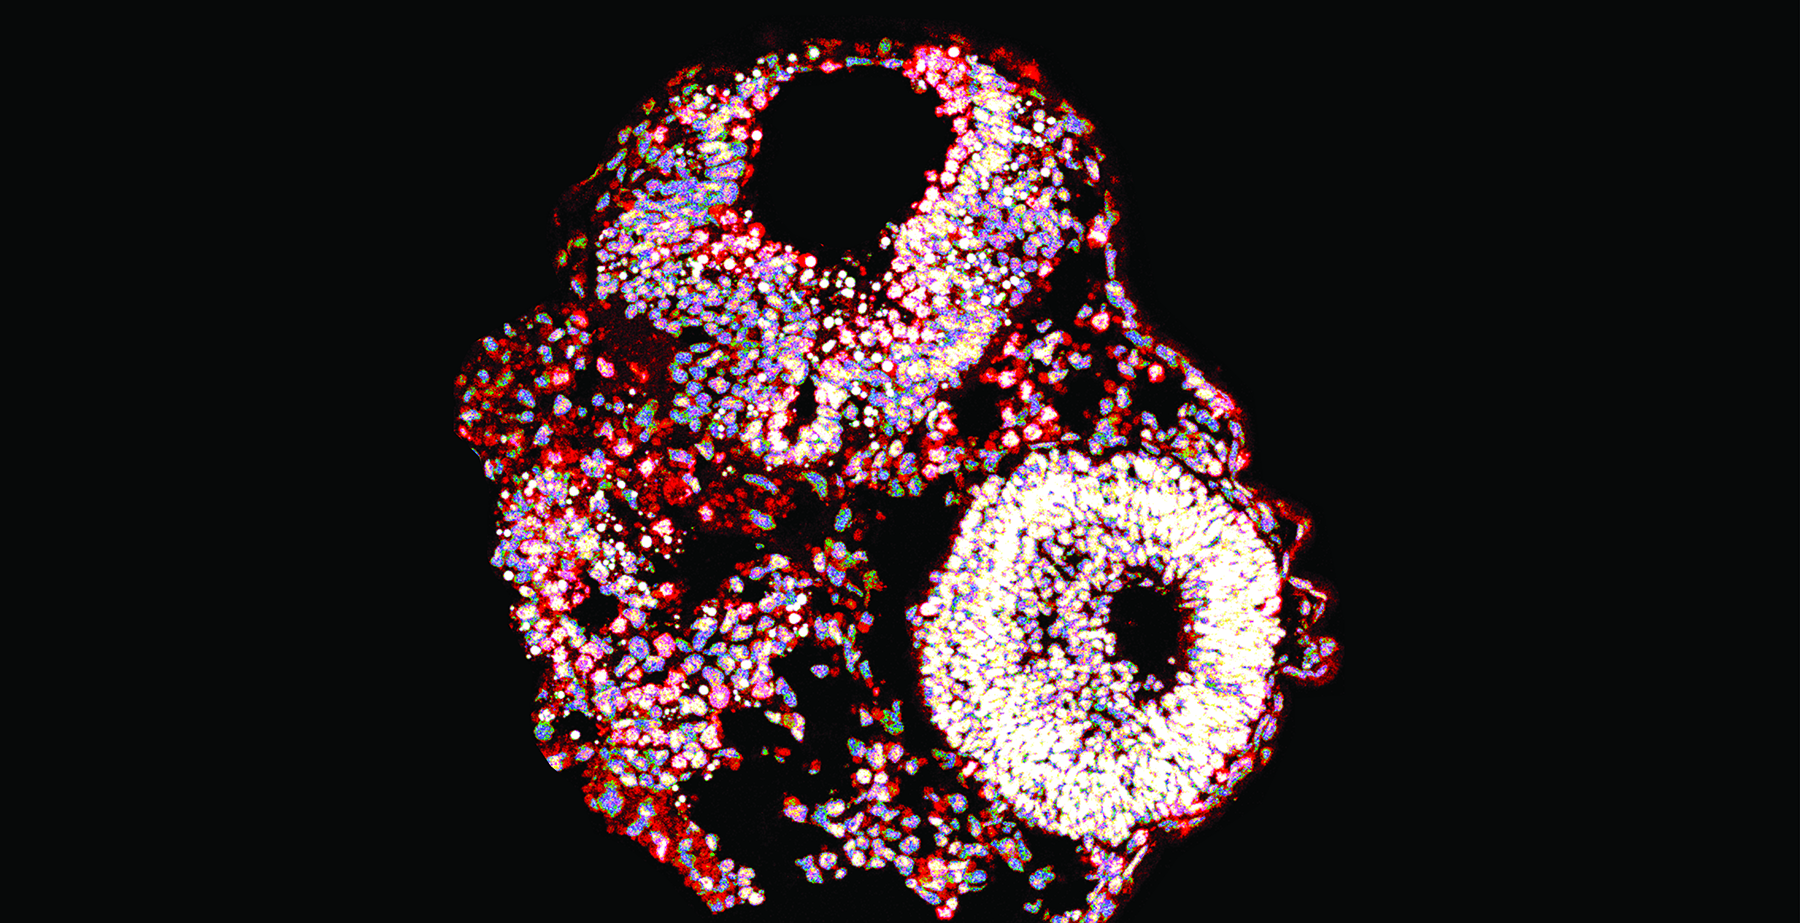  Xenopus embryo cross-section with labelled cell nuclei